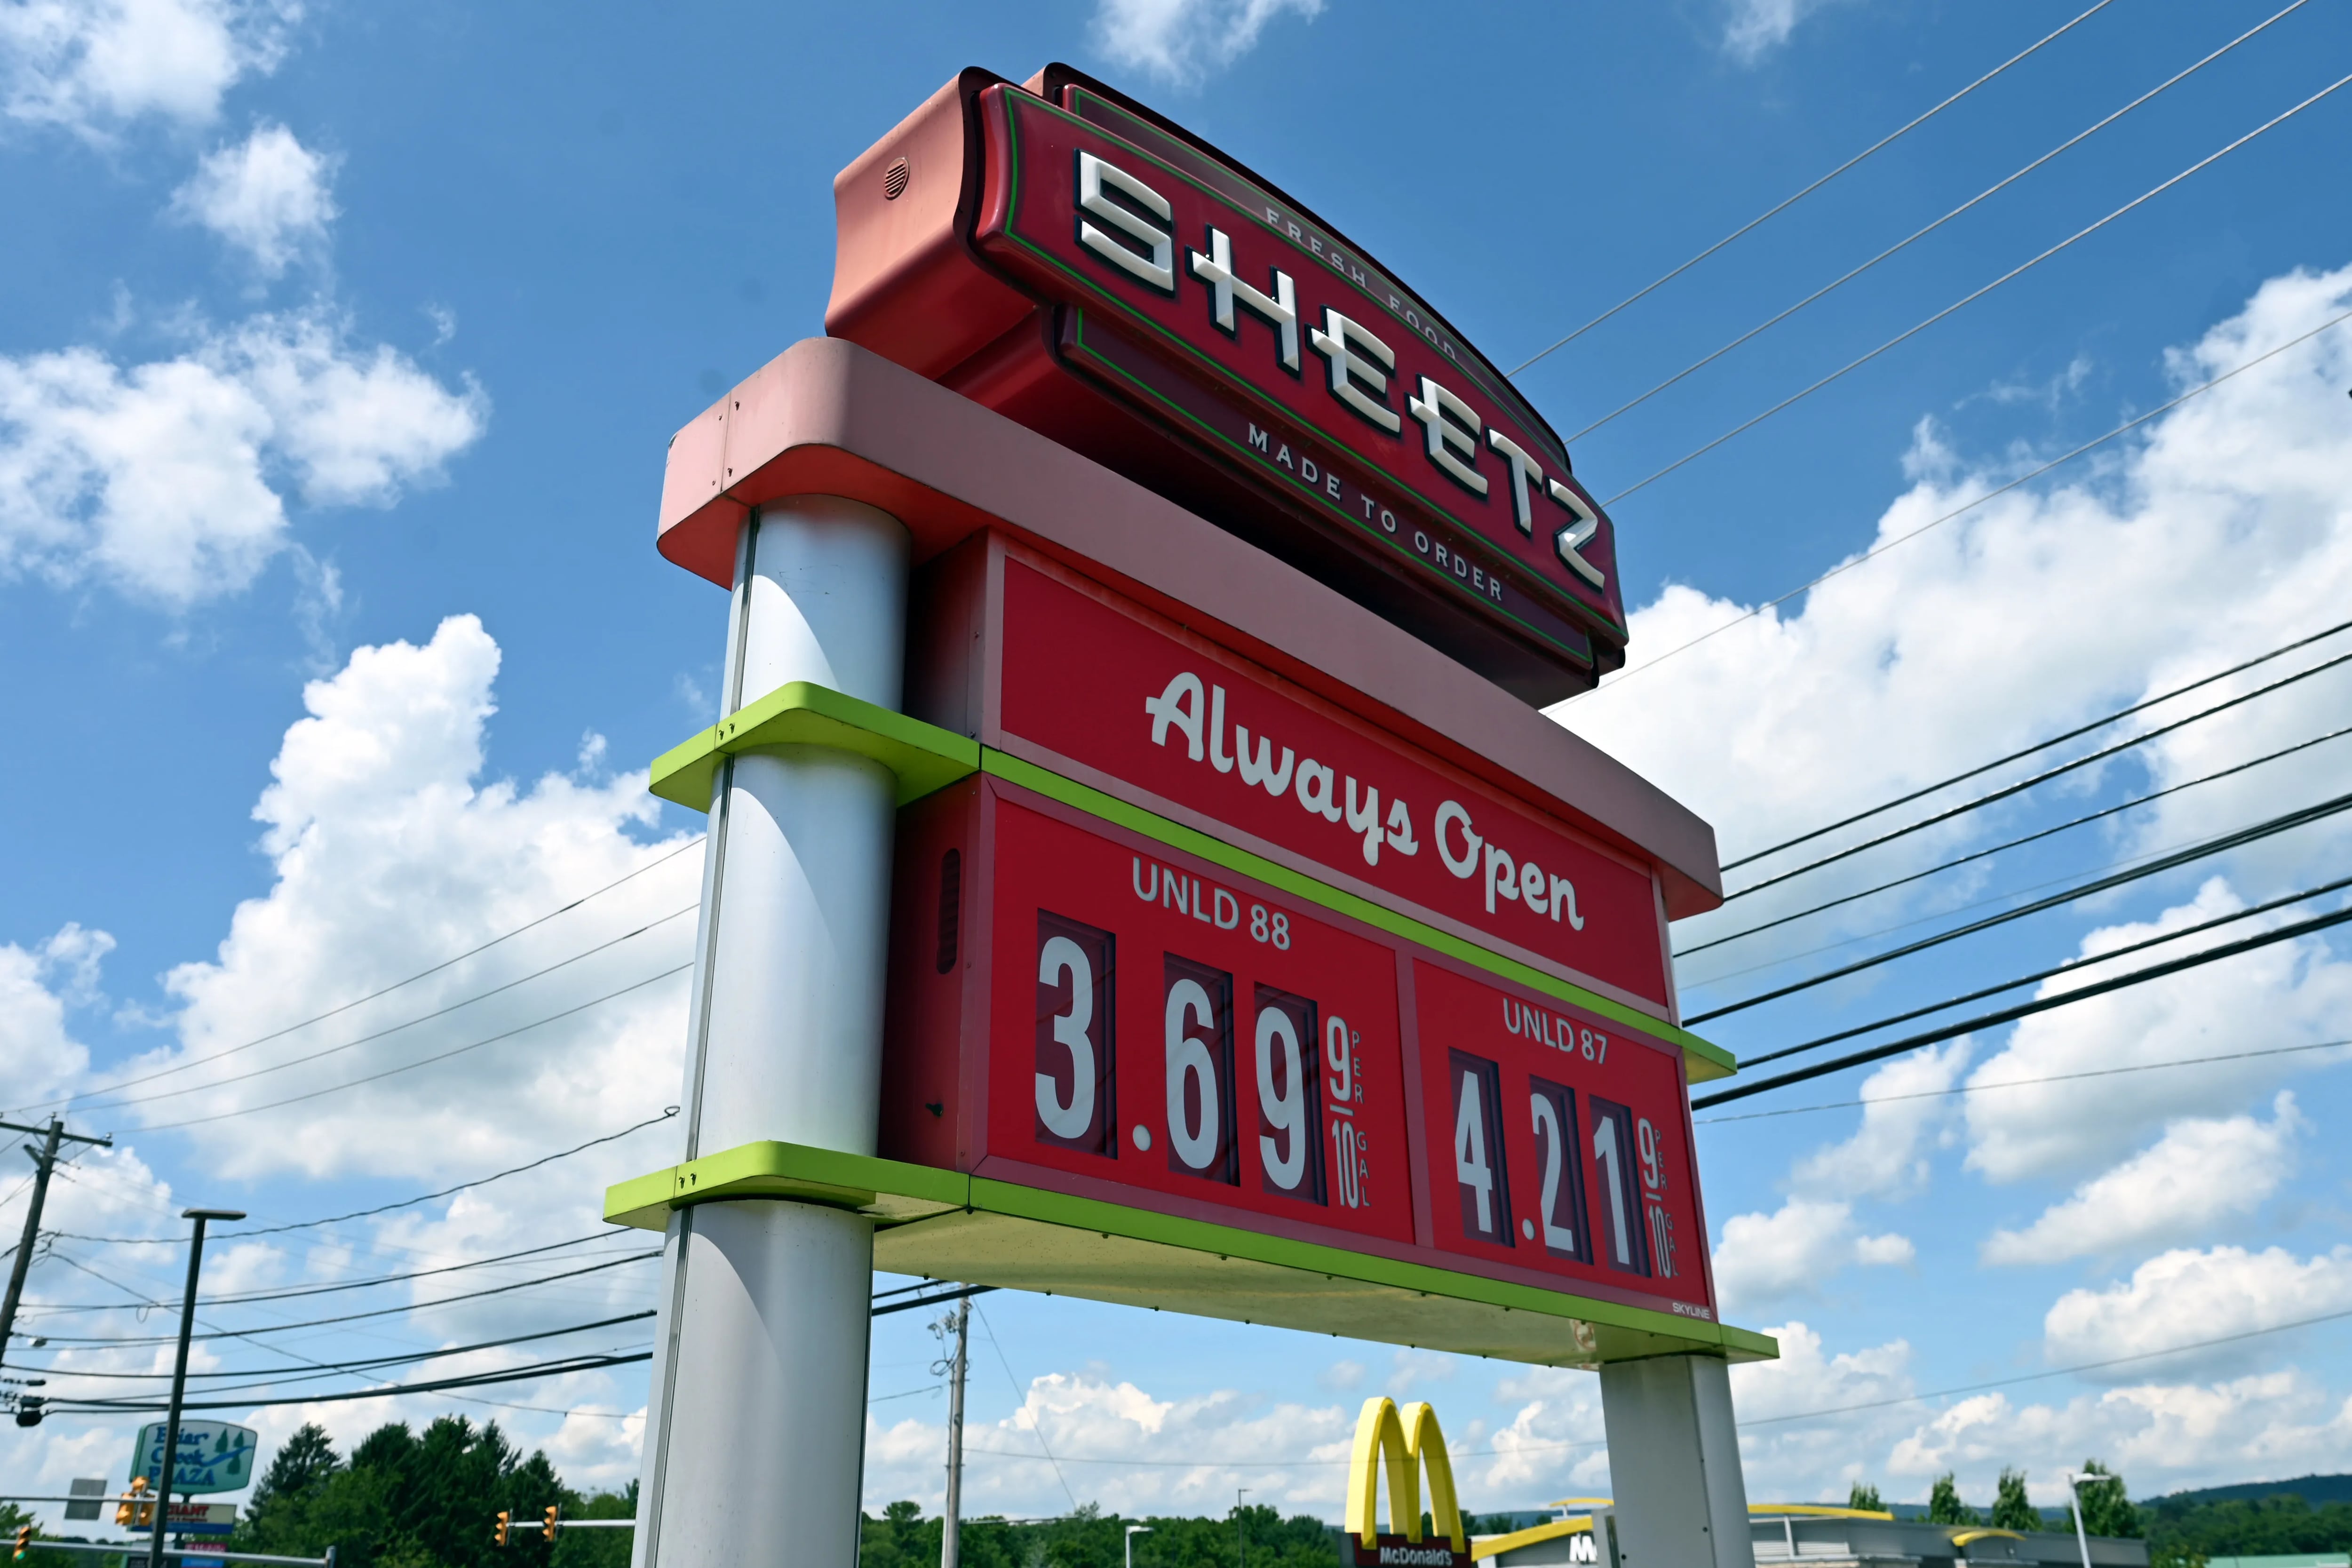 A Sheetz convenience store gas station in Berwick, Pa. selling unleaded 88 gasoline for $3.699 per gallon on Aug. 8, 2022.